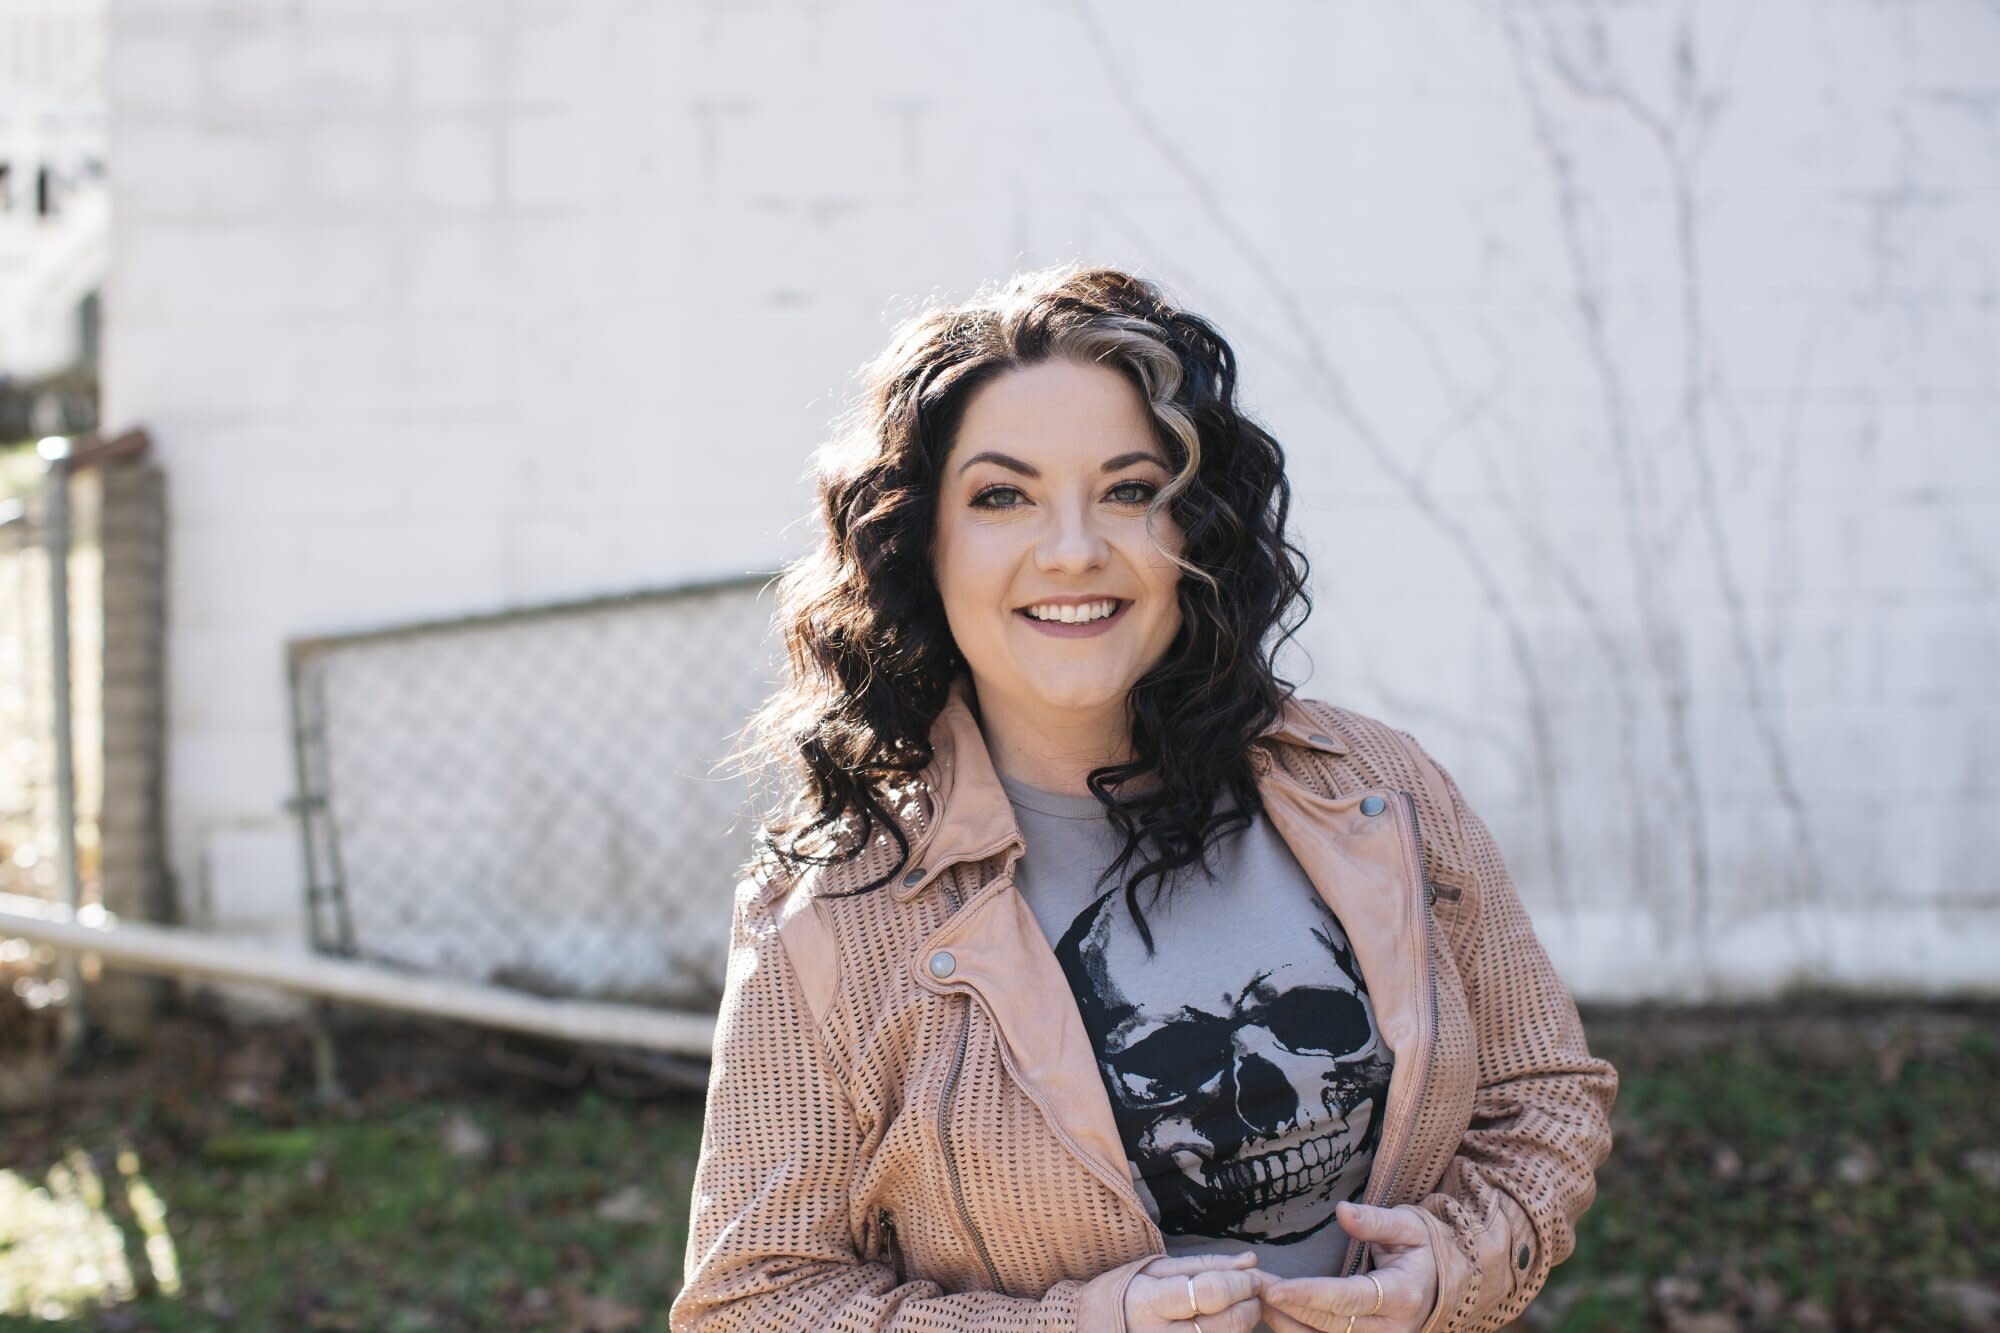 Ashley McBryde Talks Growing Up in Arkansas, Her Mom's Cooking, and